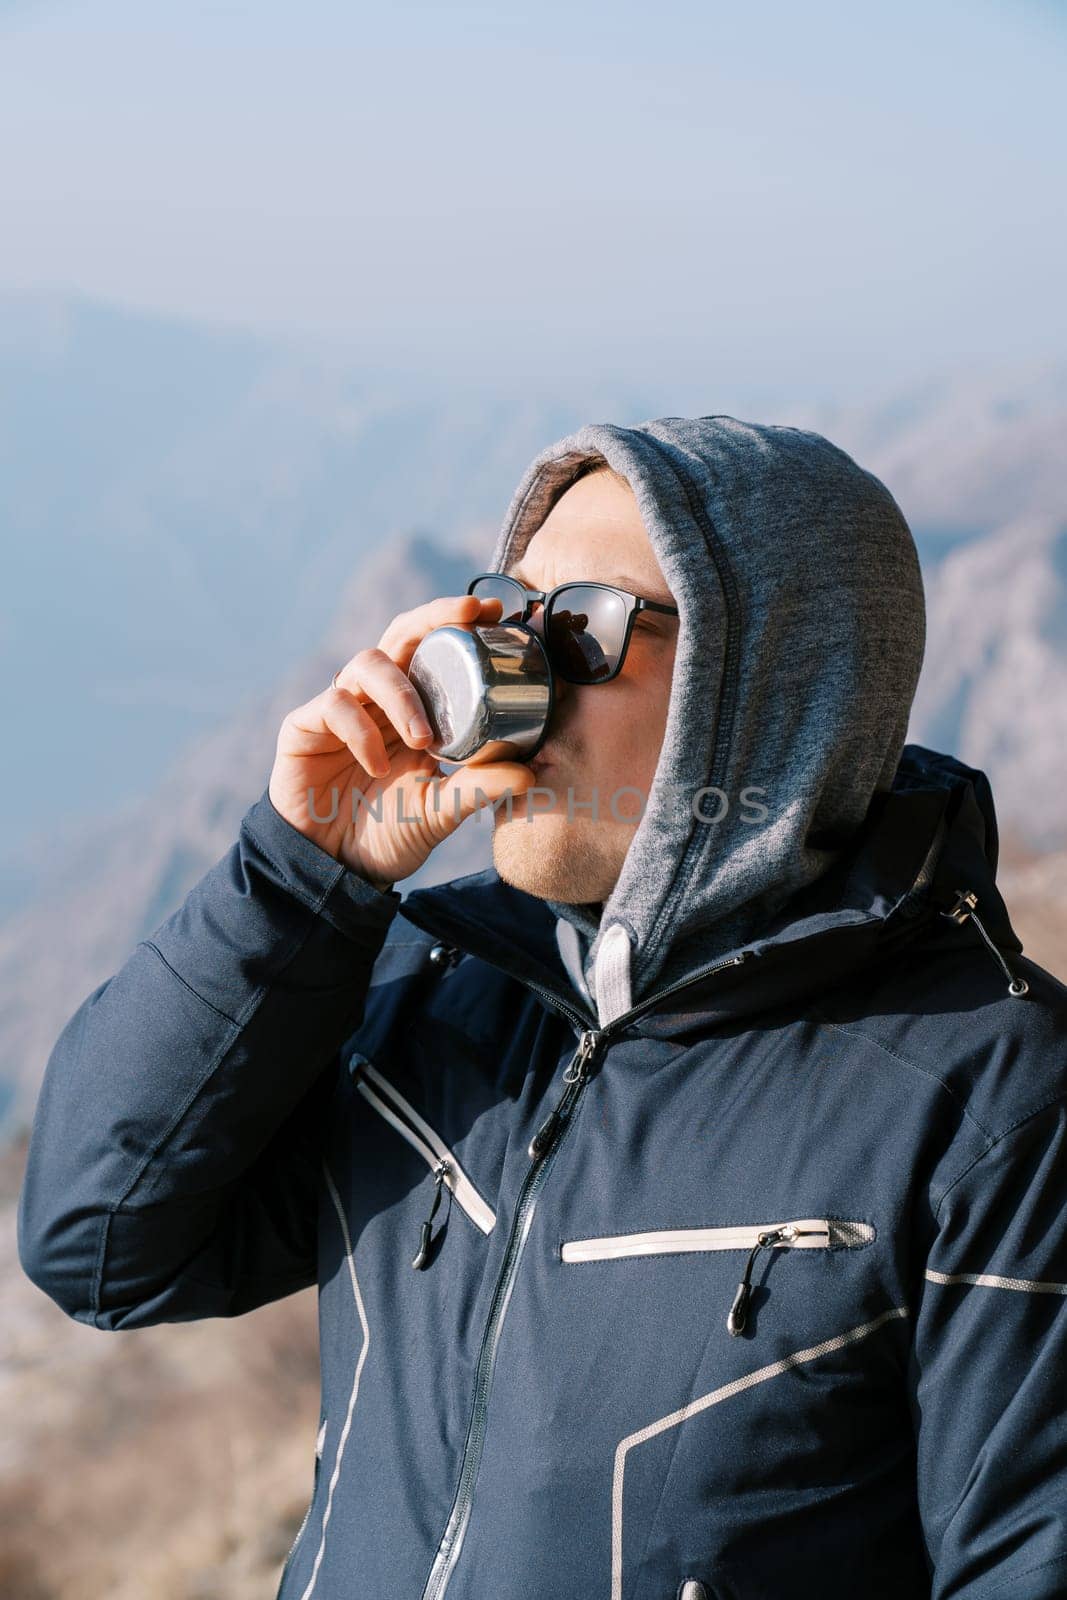 Man in a hooded jacket drinks coffee from a mug of a thermos in the mountains. High quality photo